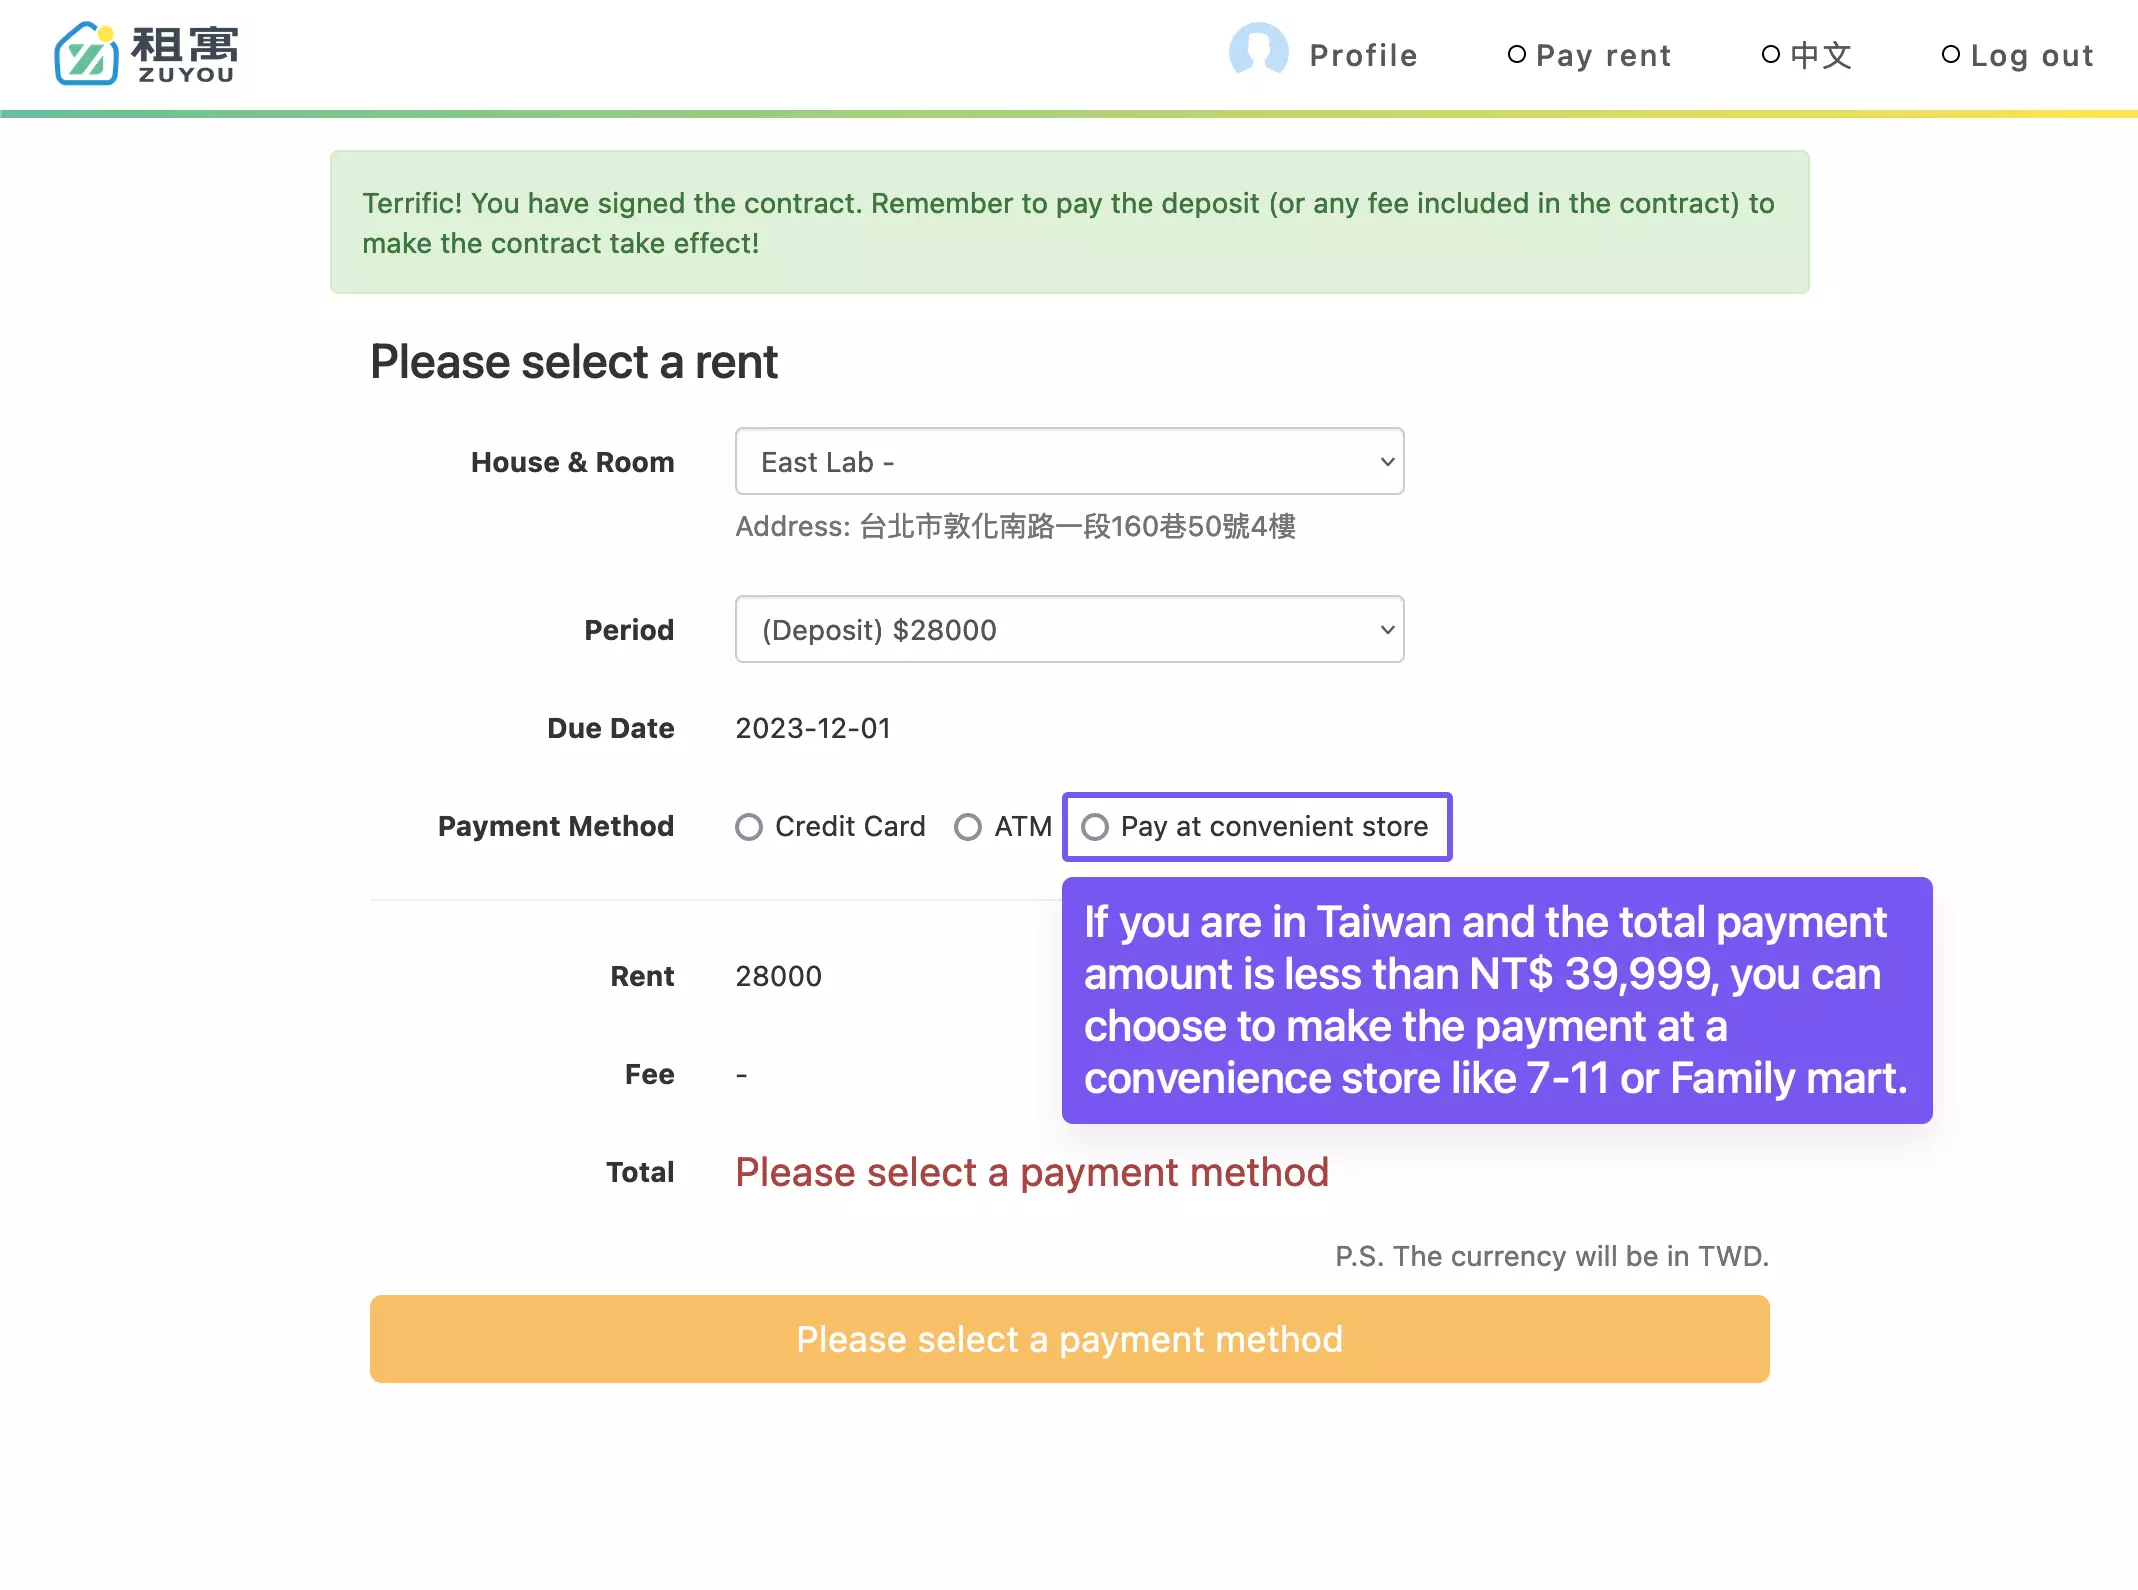 11-2-amount-less-than-39999-can-be-paid-at-csv-if-you-are-in-taiwan.png